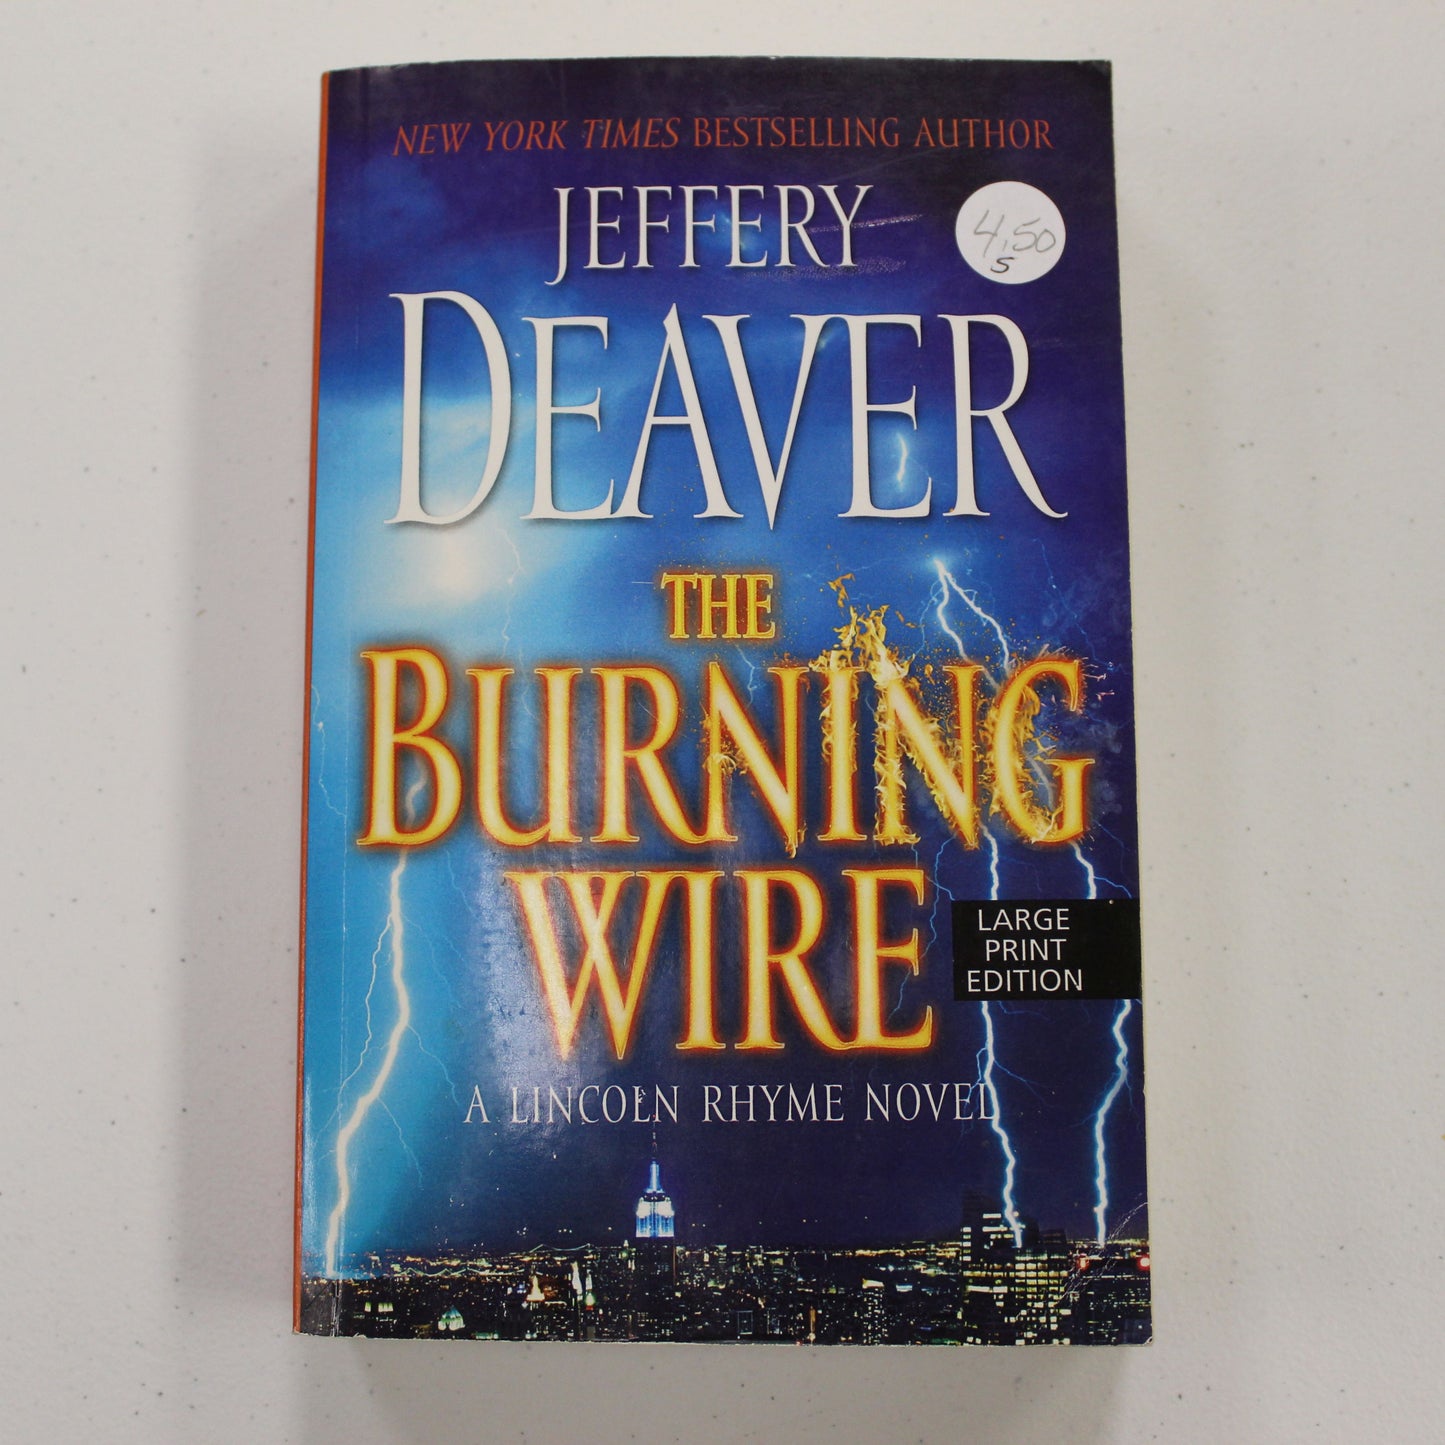 THE BURNING WIRE